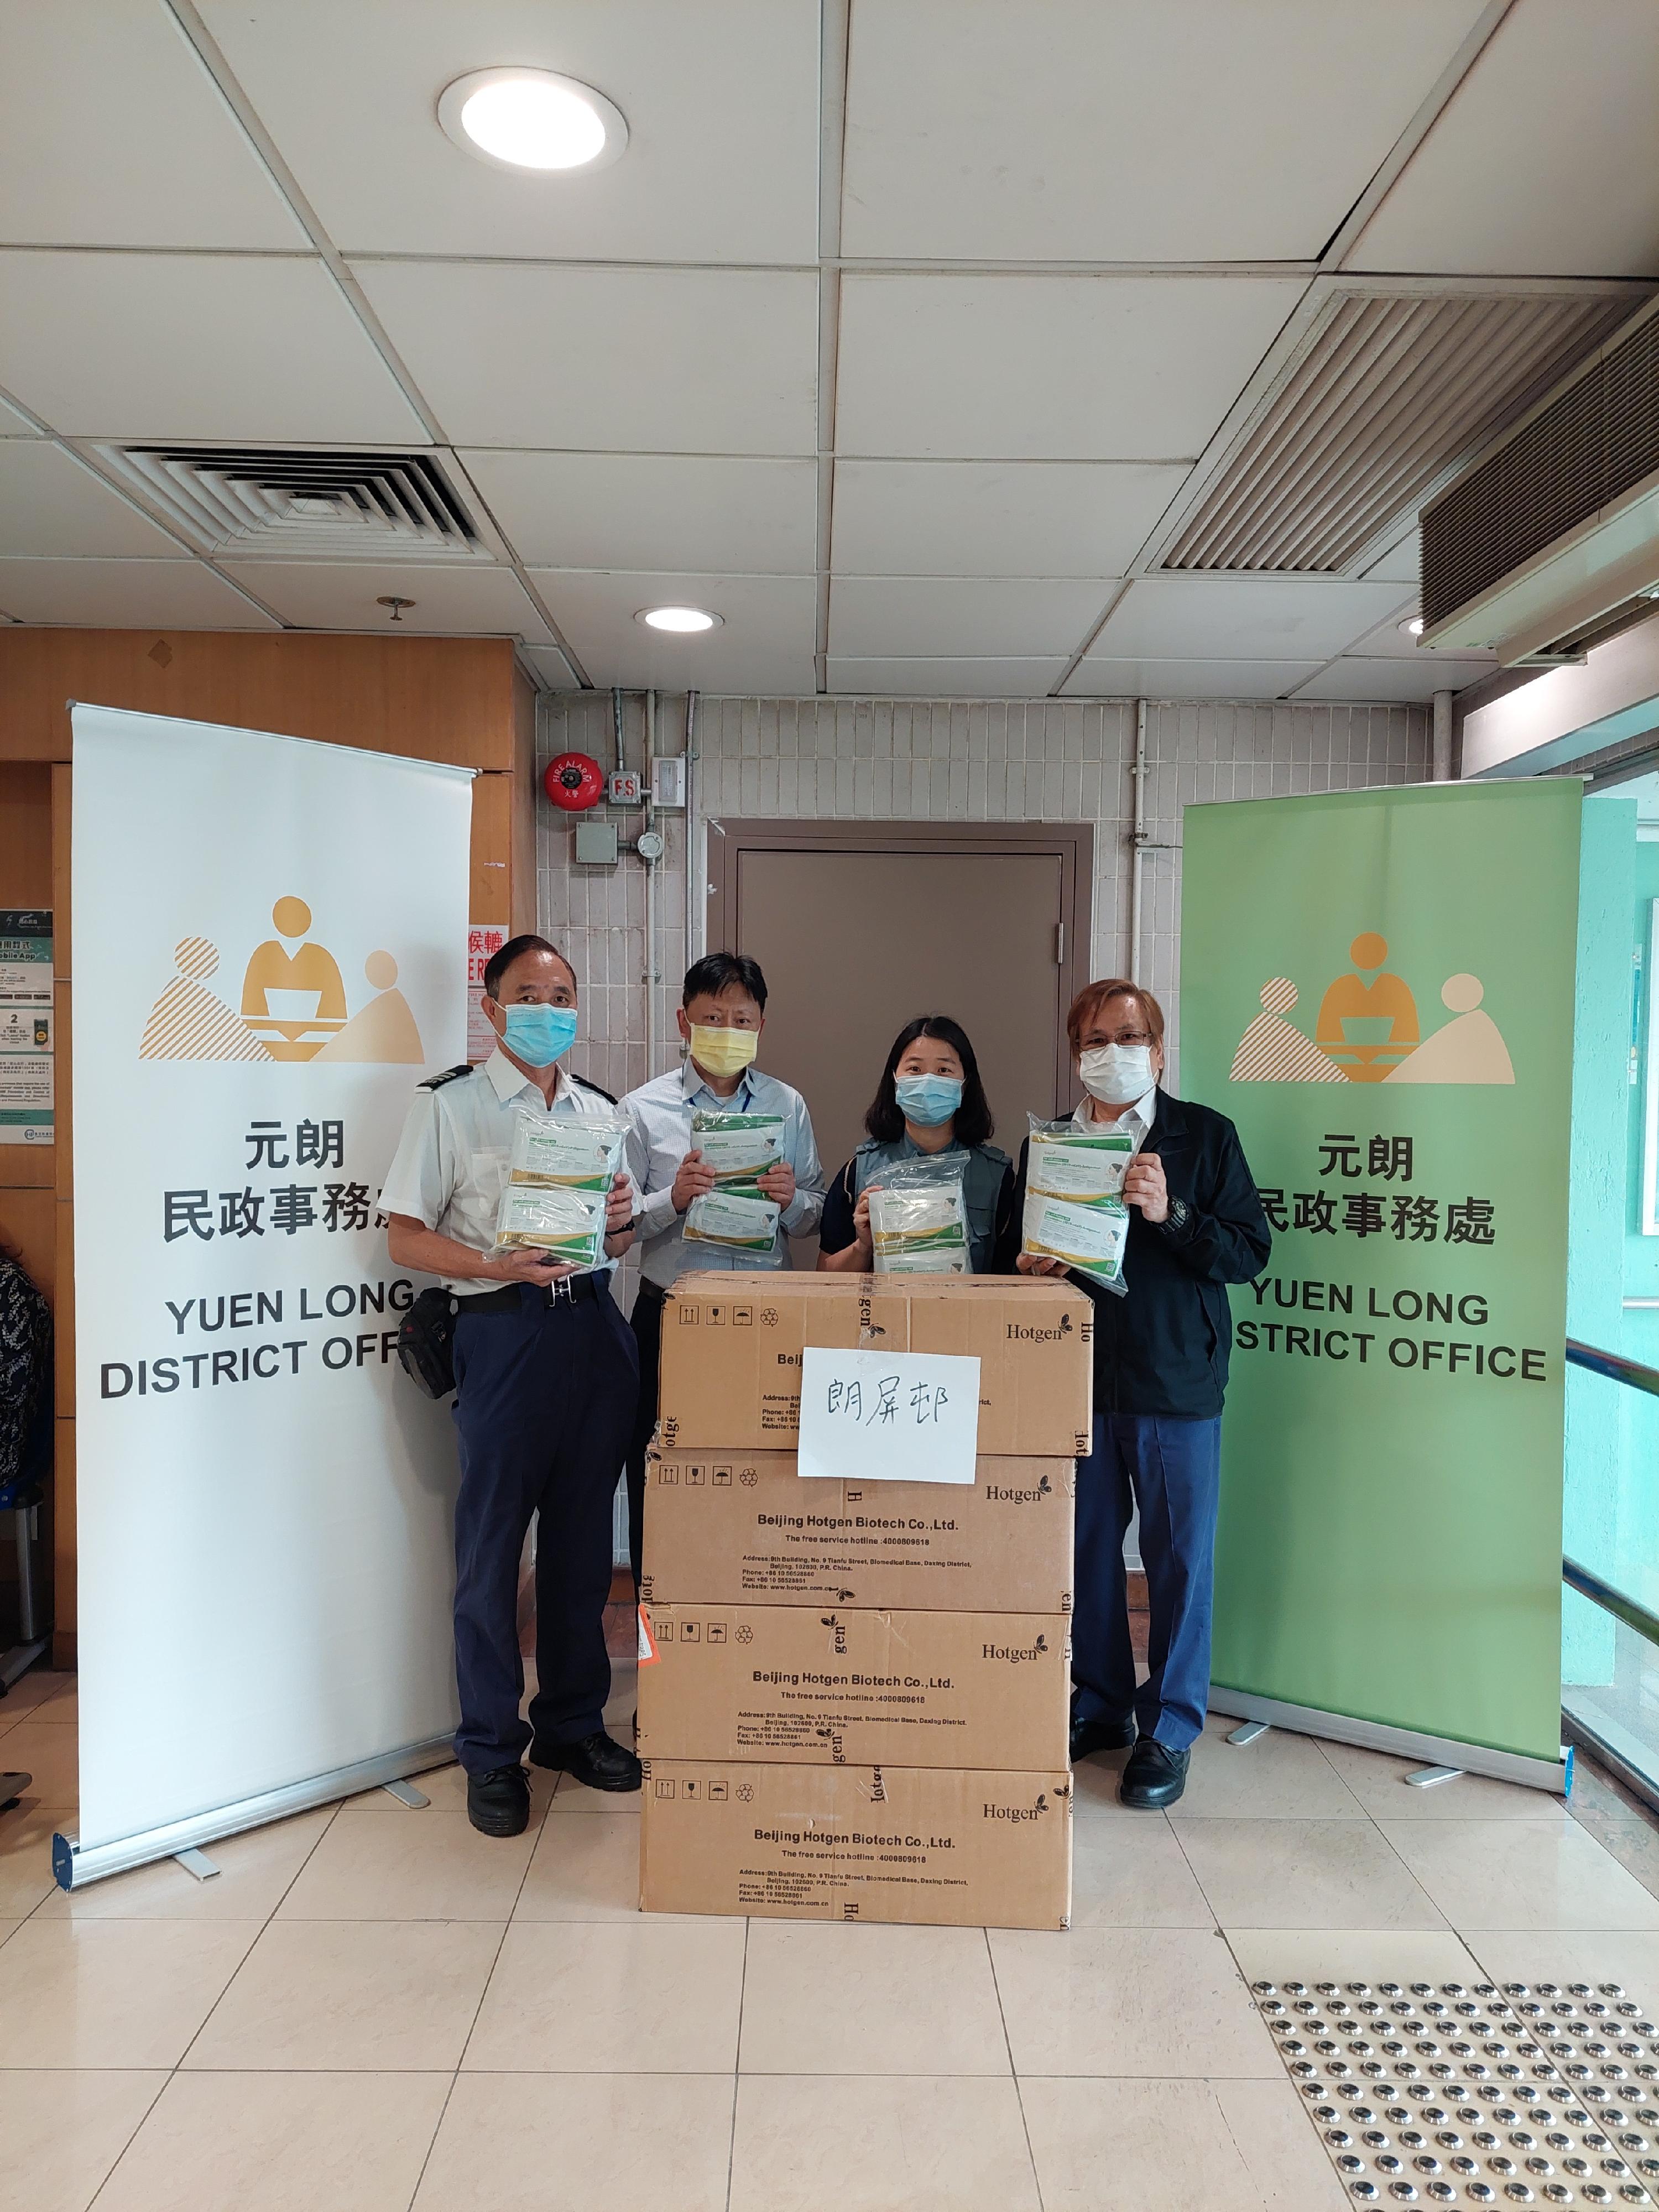 The Yuen Long District Office today (March 17) distributed COVID-19 rapid test kits to households, cleansing workers and property management staff living and working in Long Ping Estate for voluntary testing through the property management company.